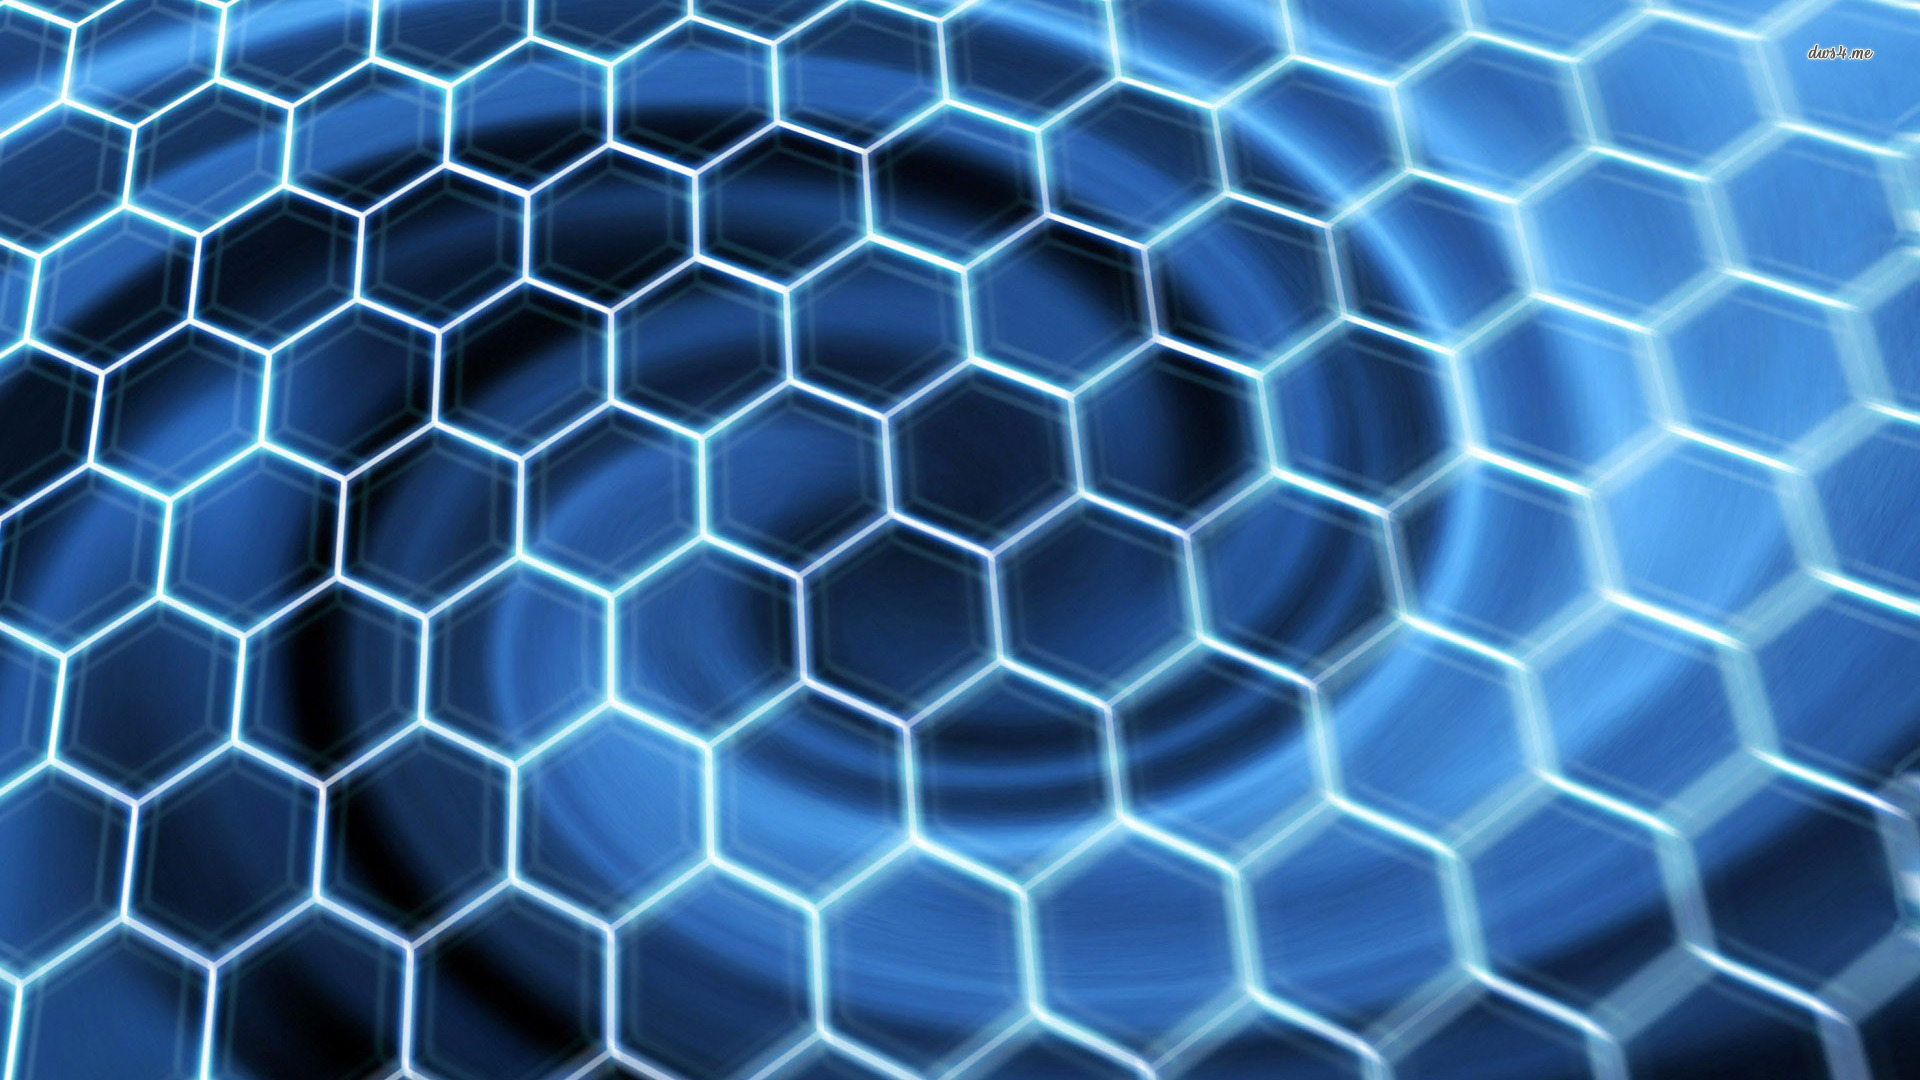 Honeycomb pattern wallpaper - Abstract wallpapers - #12652